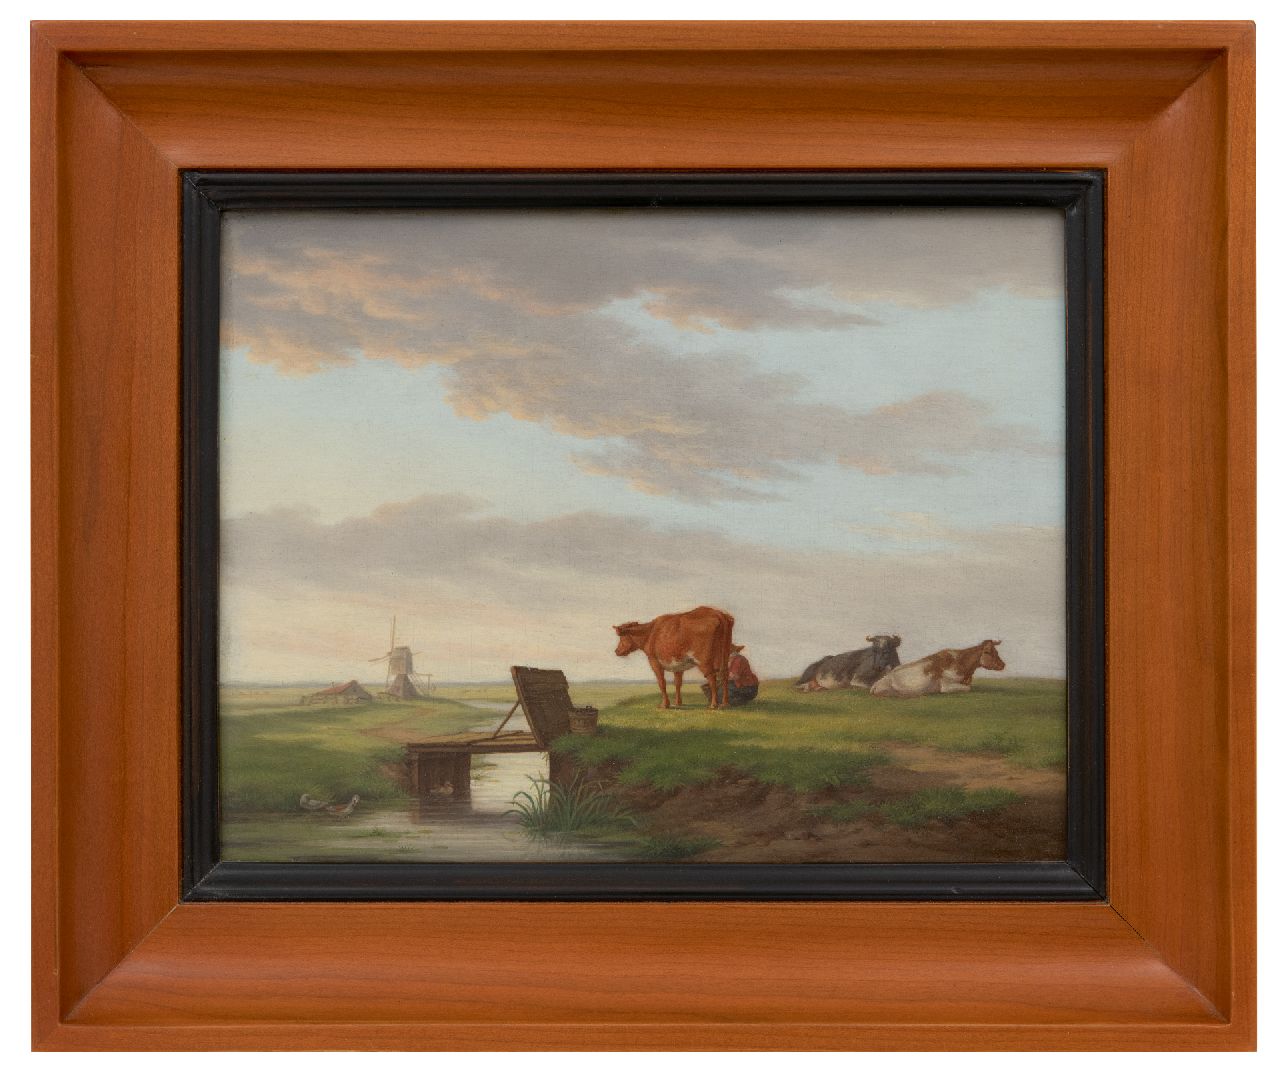 Burgh H.A. van der | Hendrik Adam van der Burgh | Paintings offered for sale | Cows in a landscape with a mill, oil on panel 20.4 x 26.3 cm, signed l.r. and dated 1821